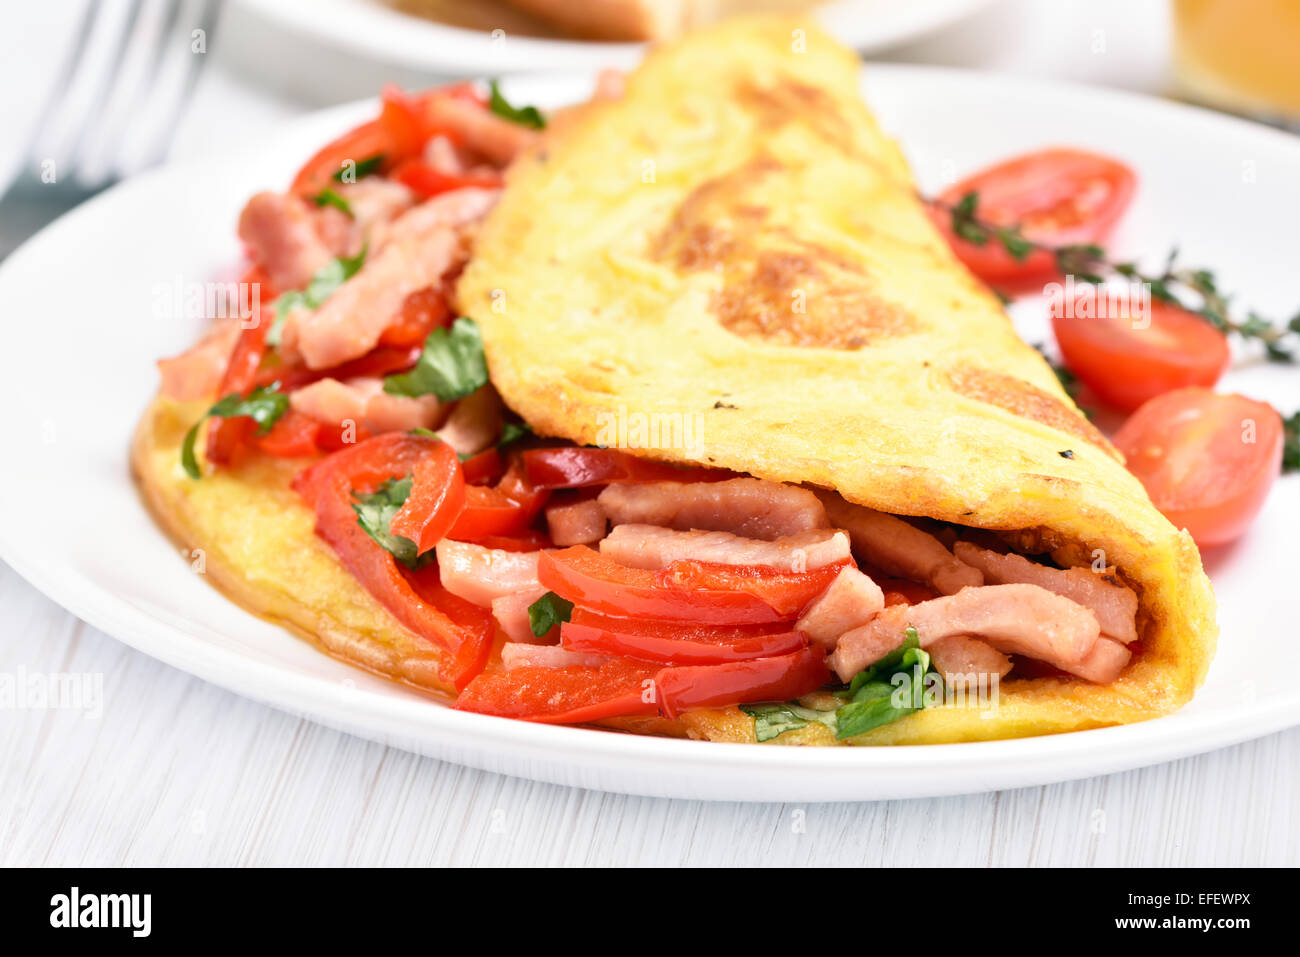 Omelette with vegetables and ham on white plate, close up view Stock Photo